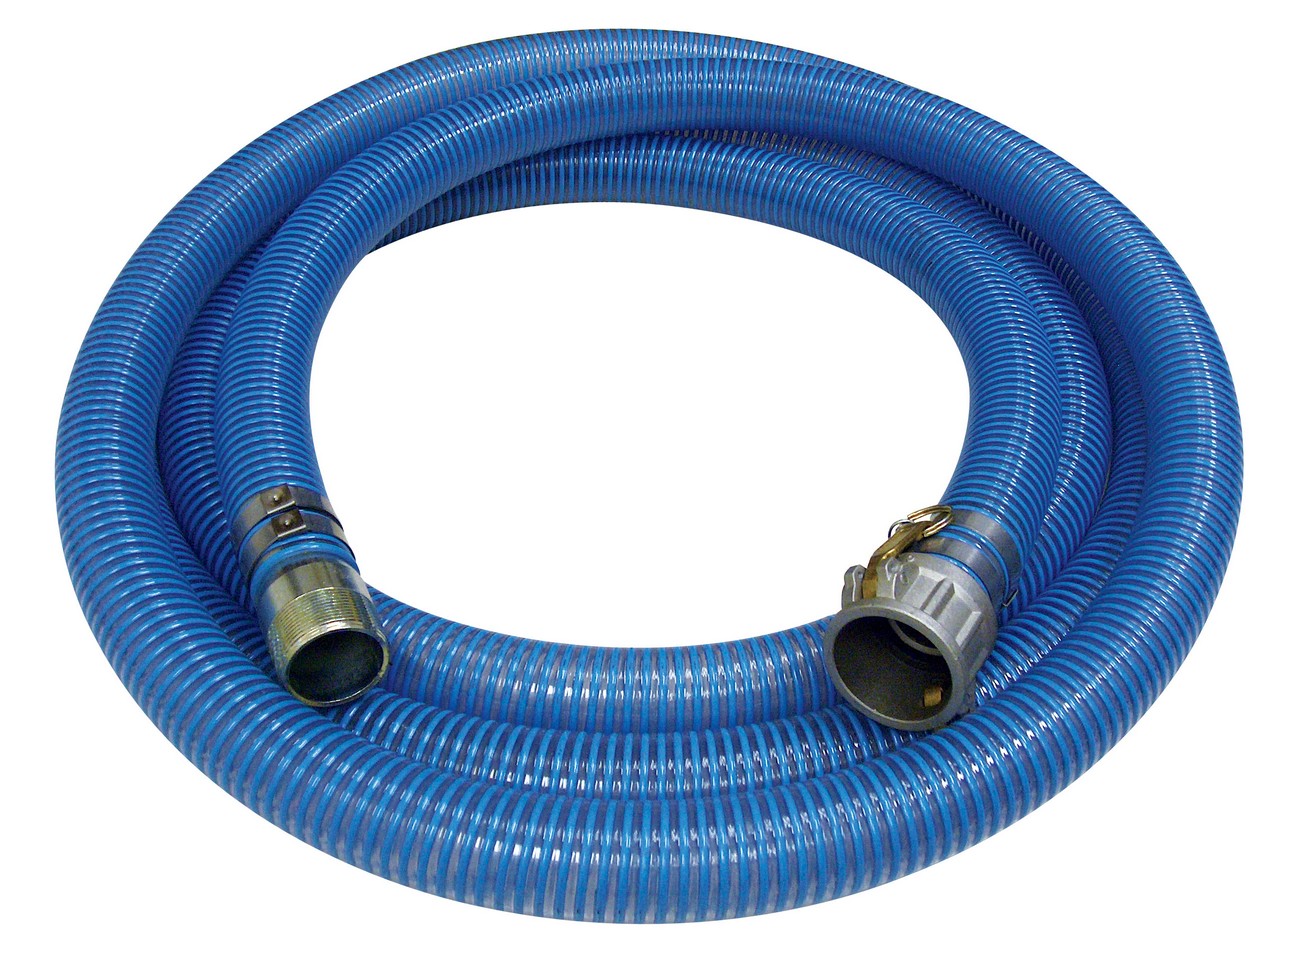 PicturesCategory/SATURN Water Suction Hose with Part C and E Camlocks.jpg